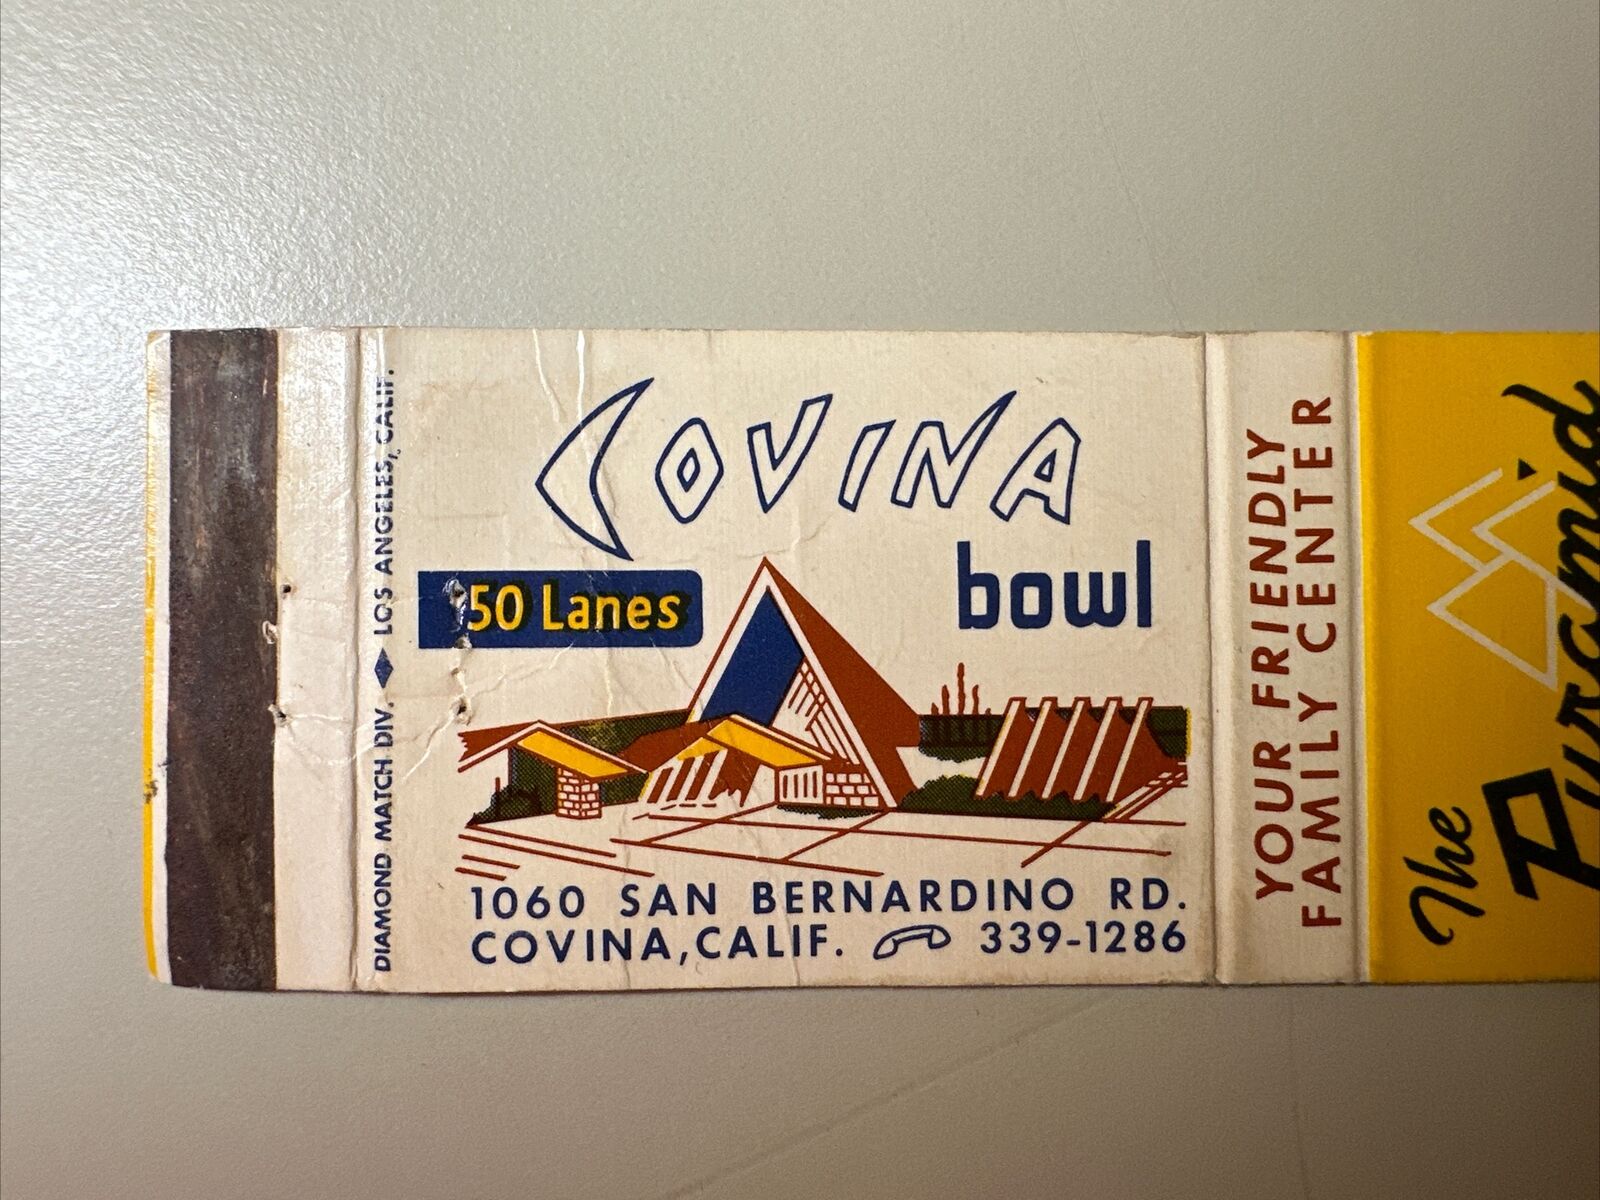 Vintage 1960s Covina Bowl California Bowling Alley Mid-Century Matchbook Cover